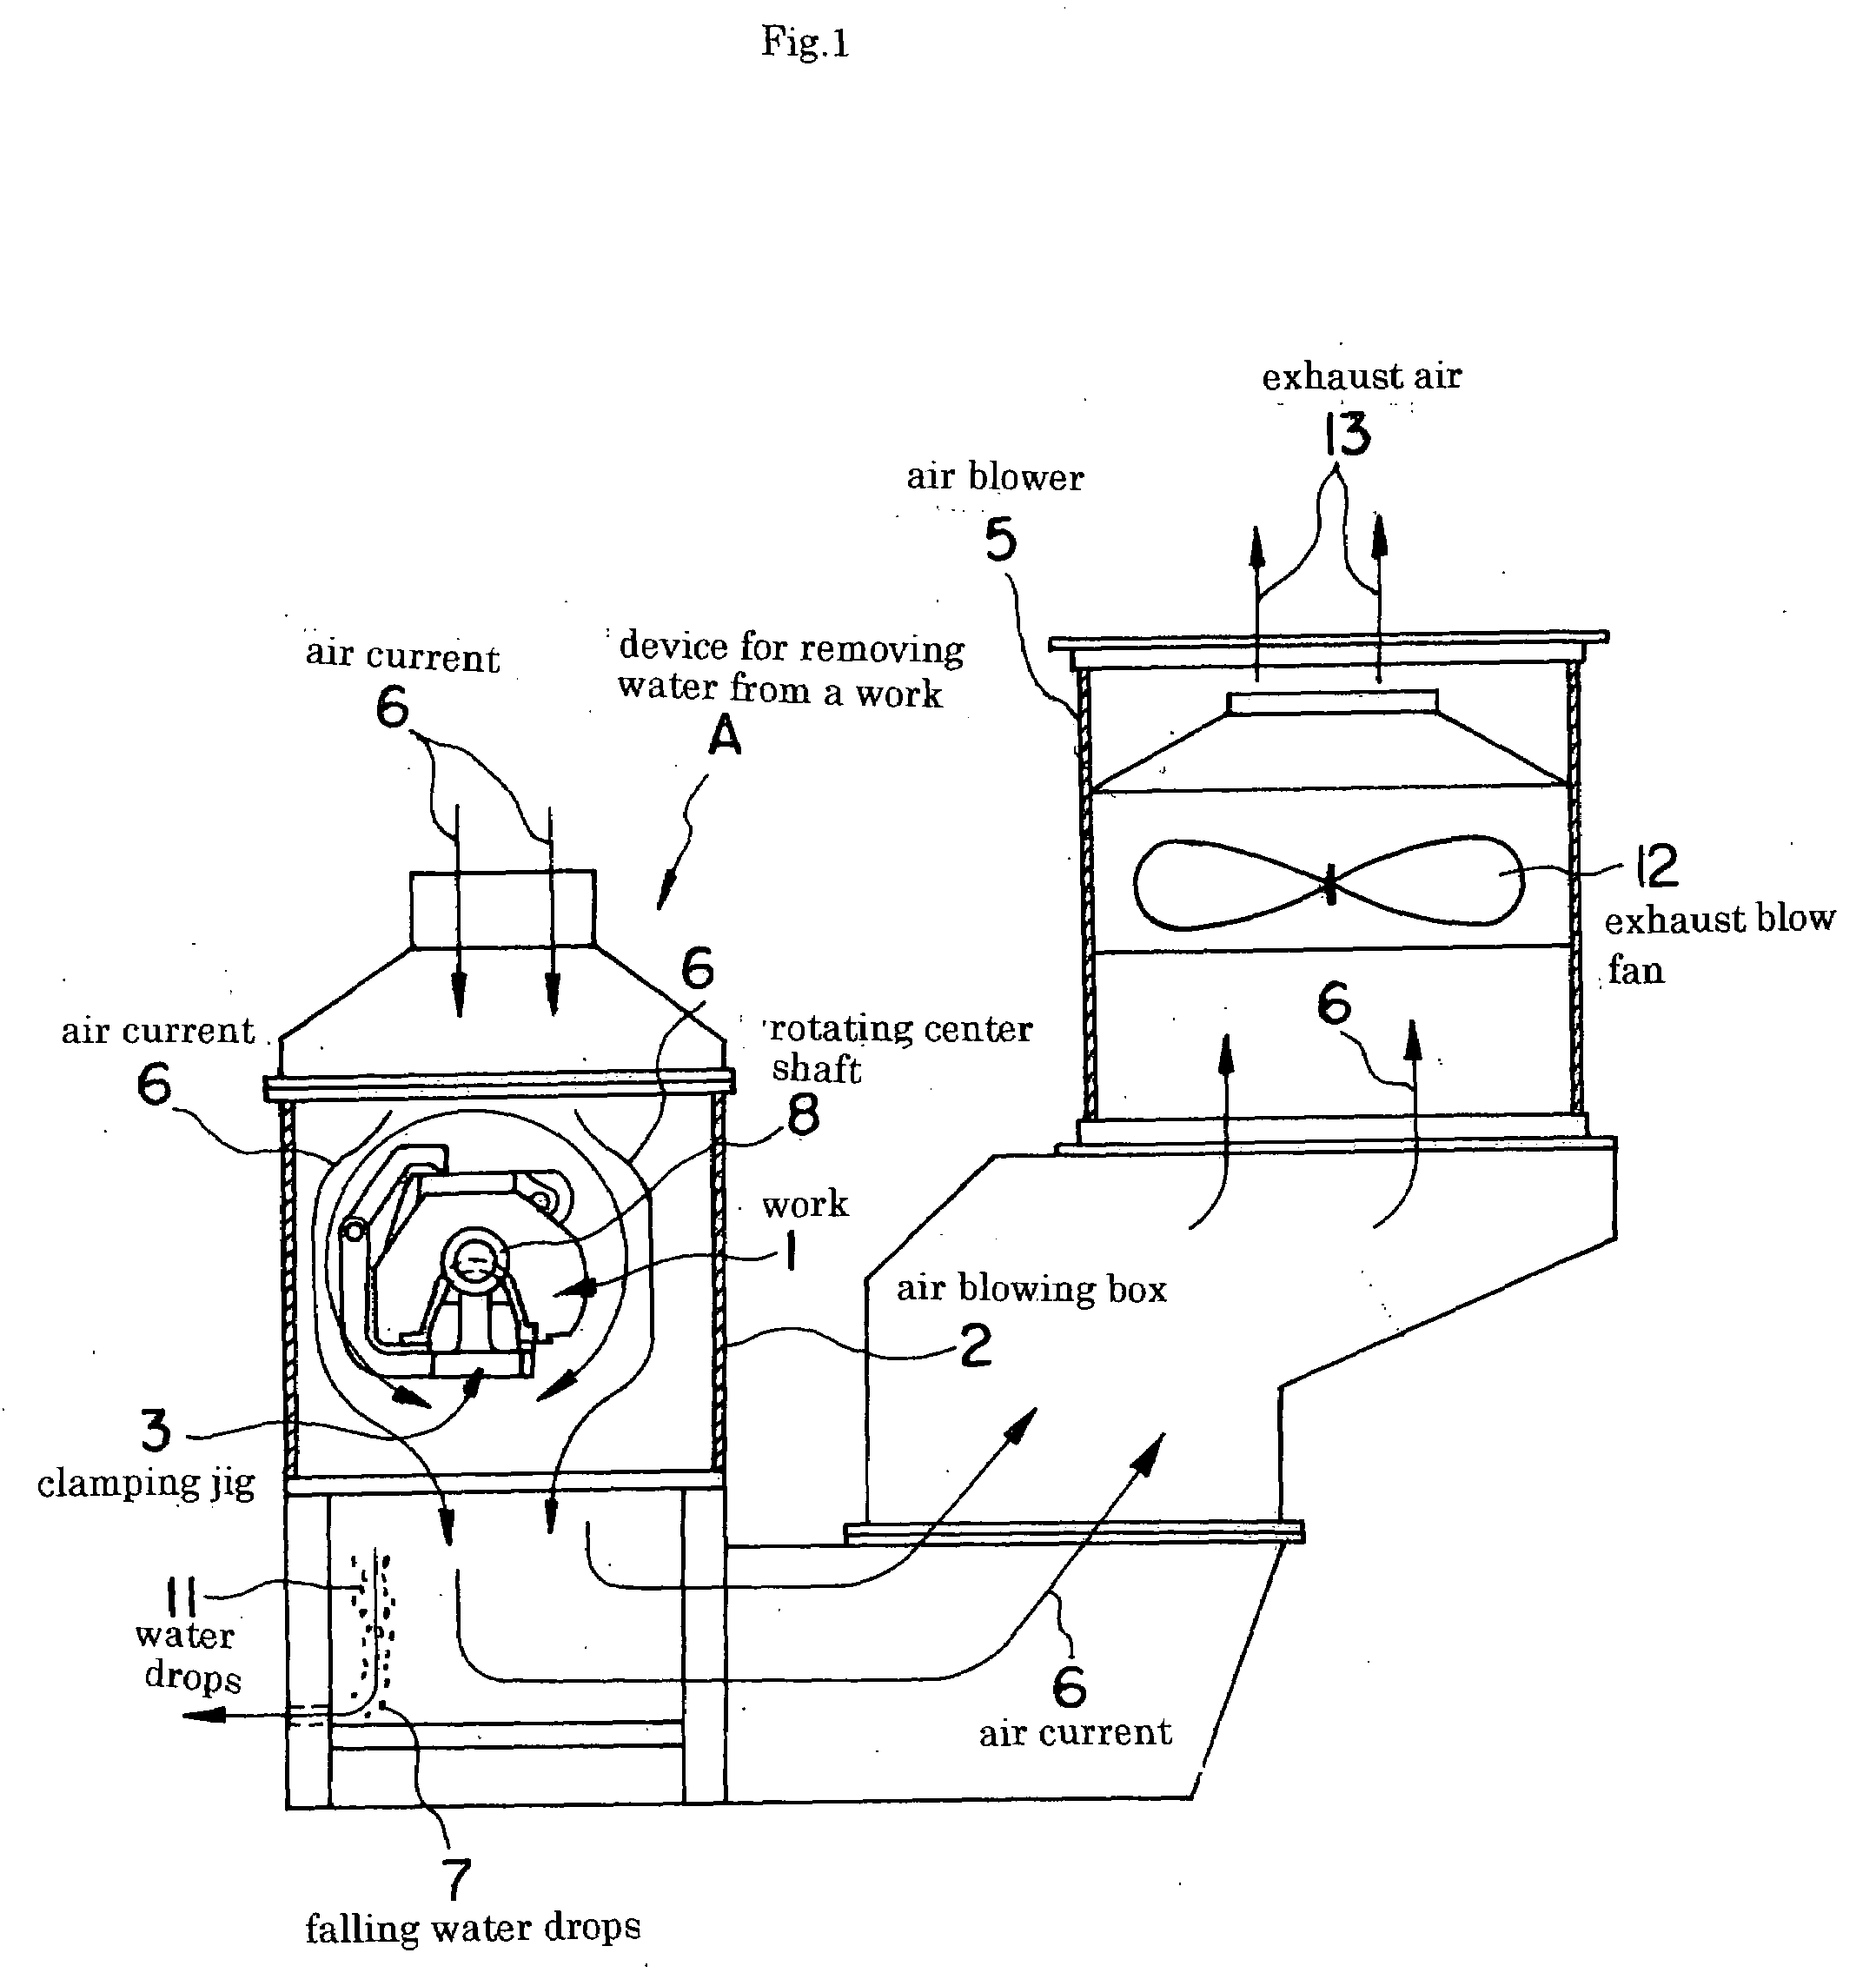 Device for removing water from a work